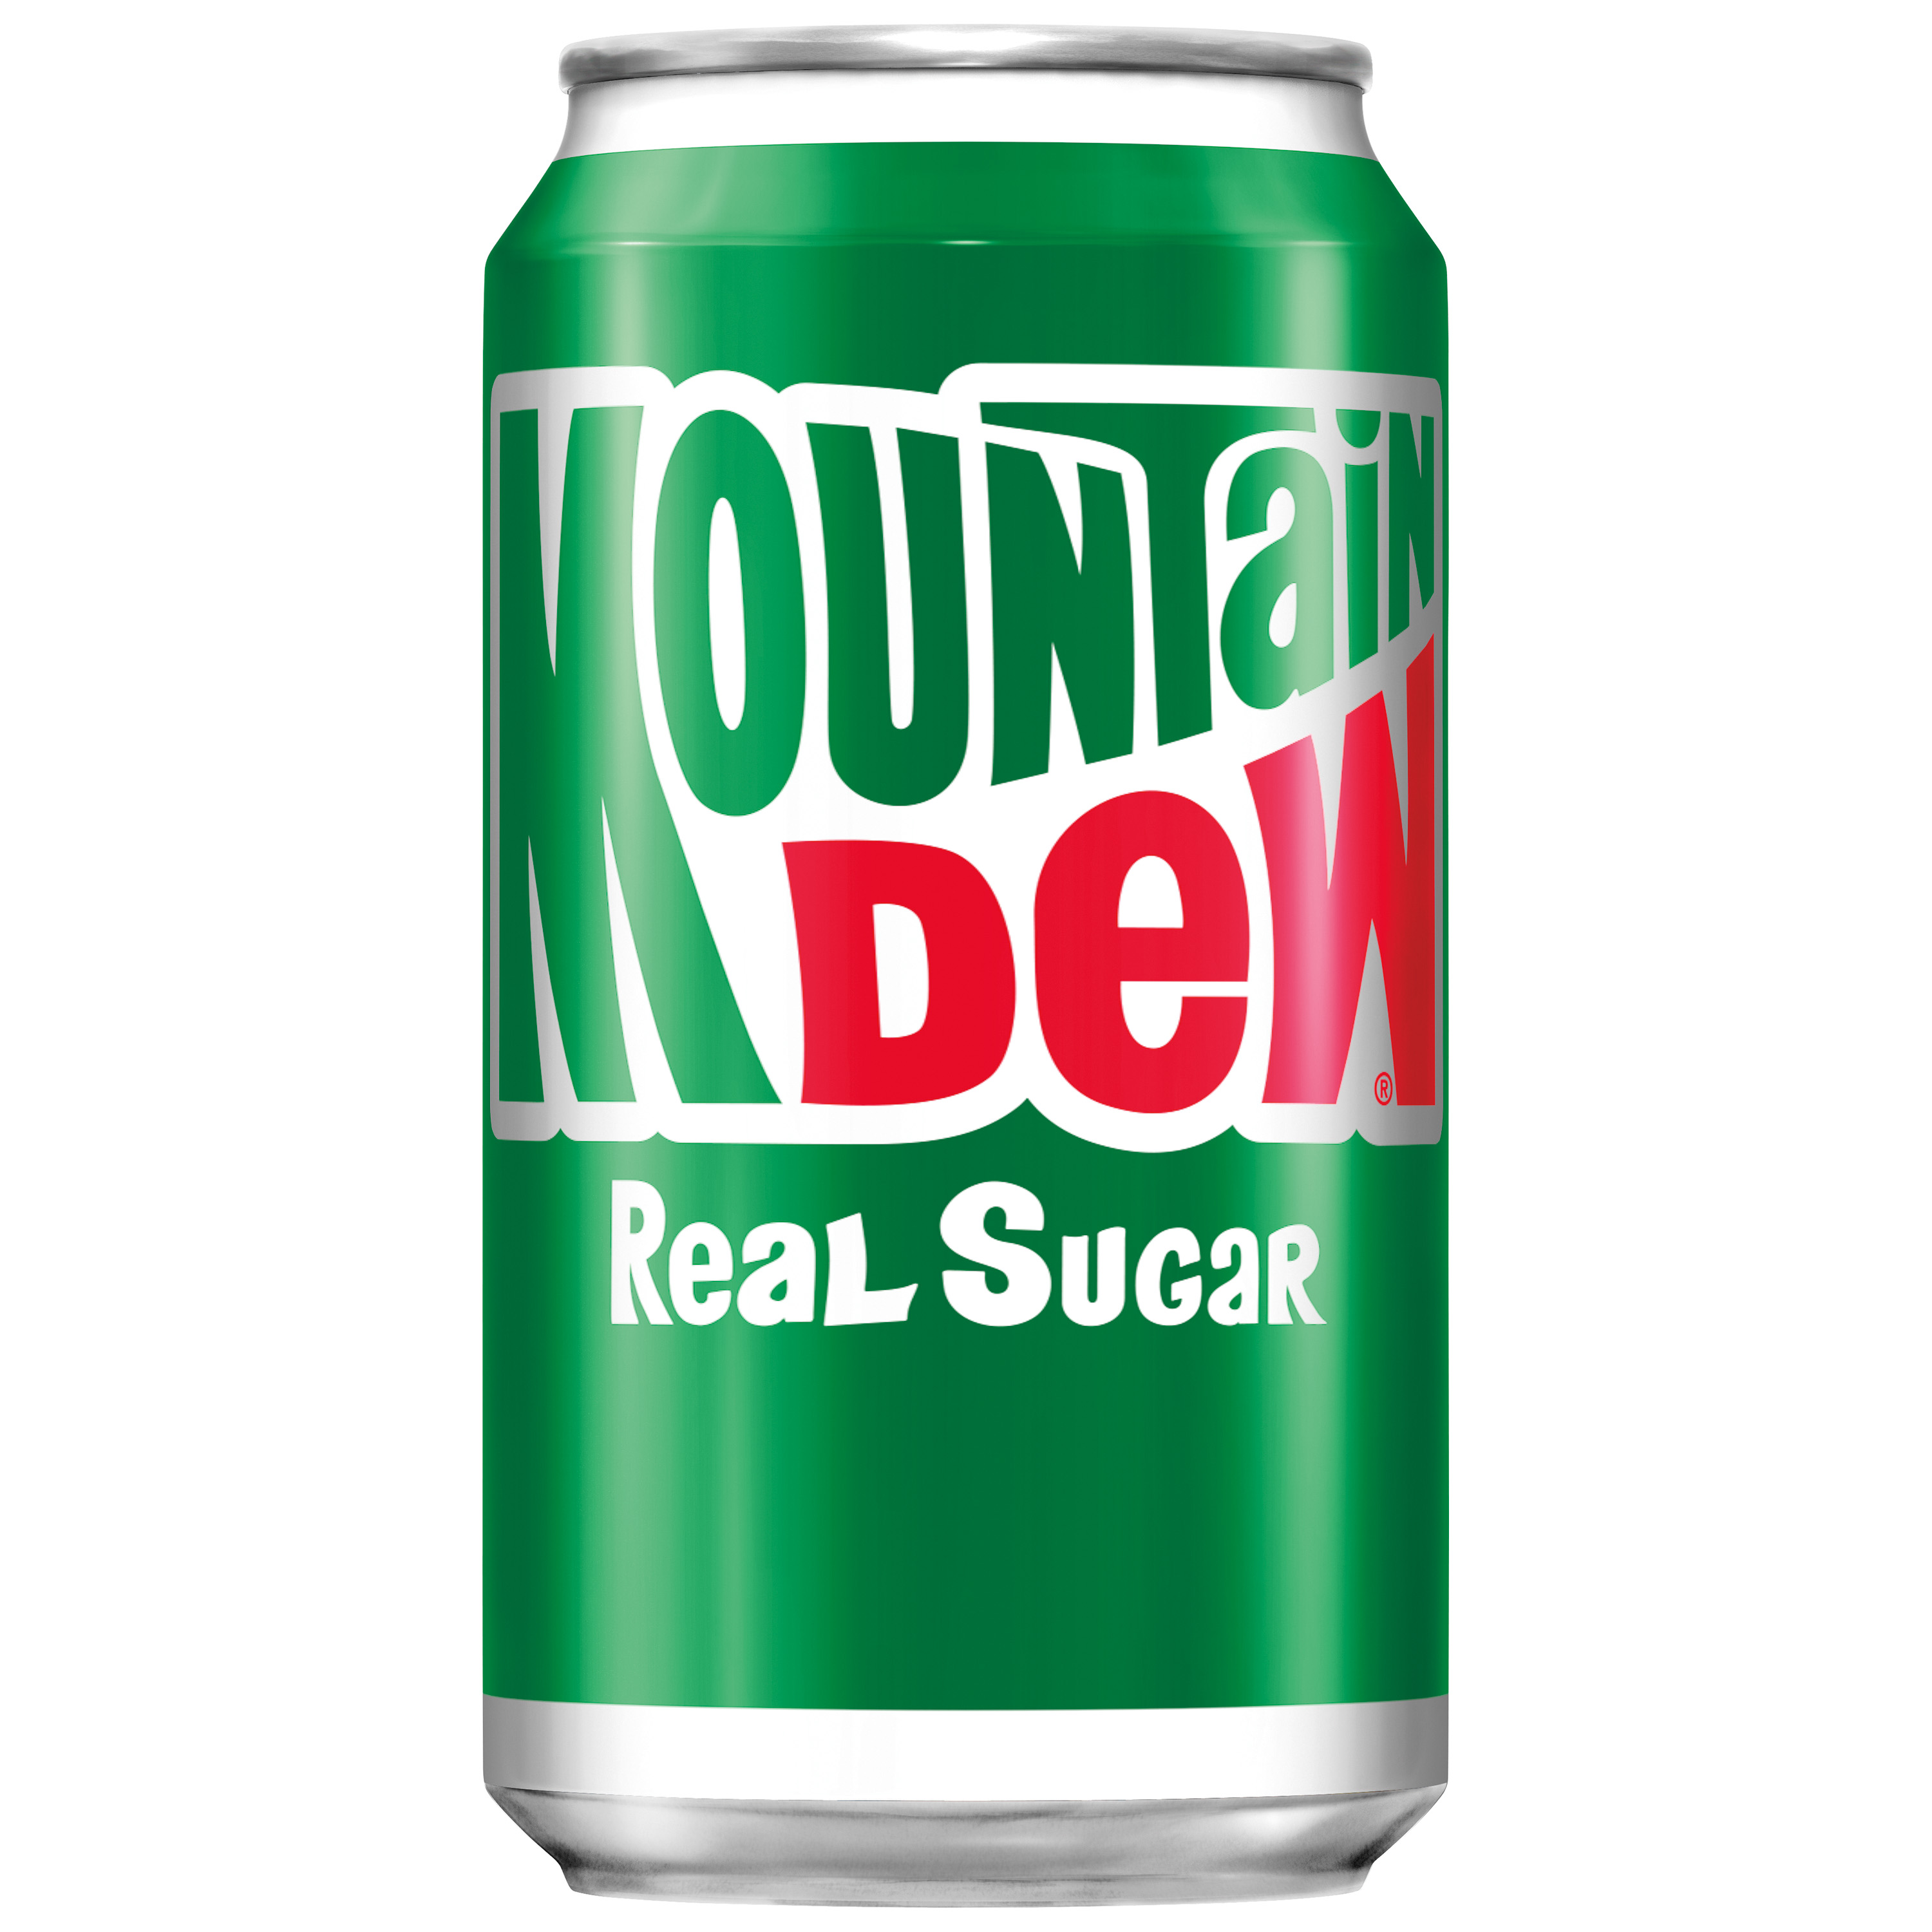 Mountain Dew Throwback with Real Sugar Soda Pop, 12 fl oz, 12 Pack Cans - image 2 of 5